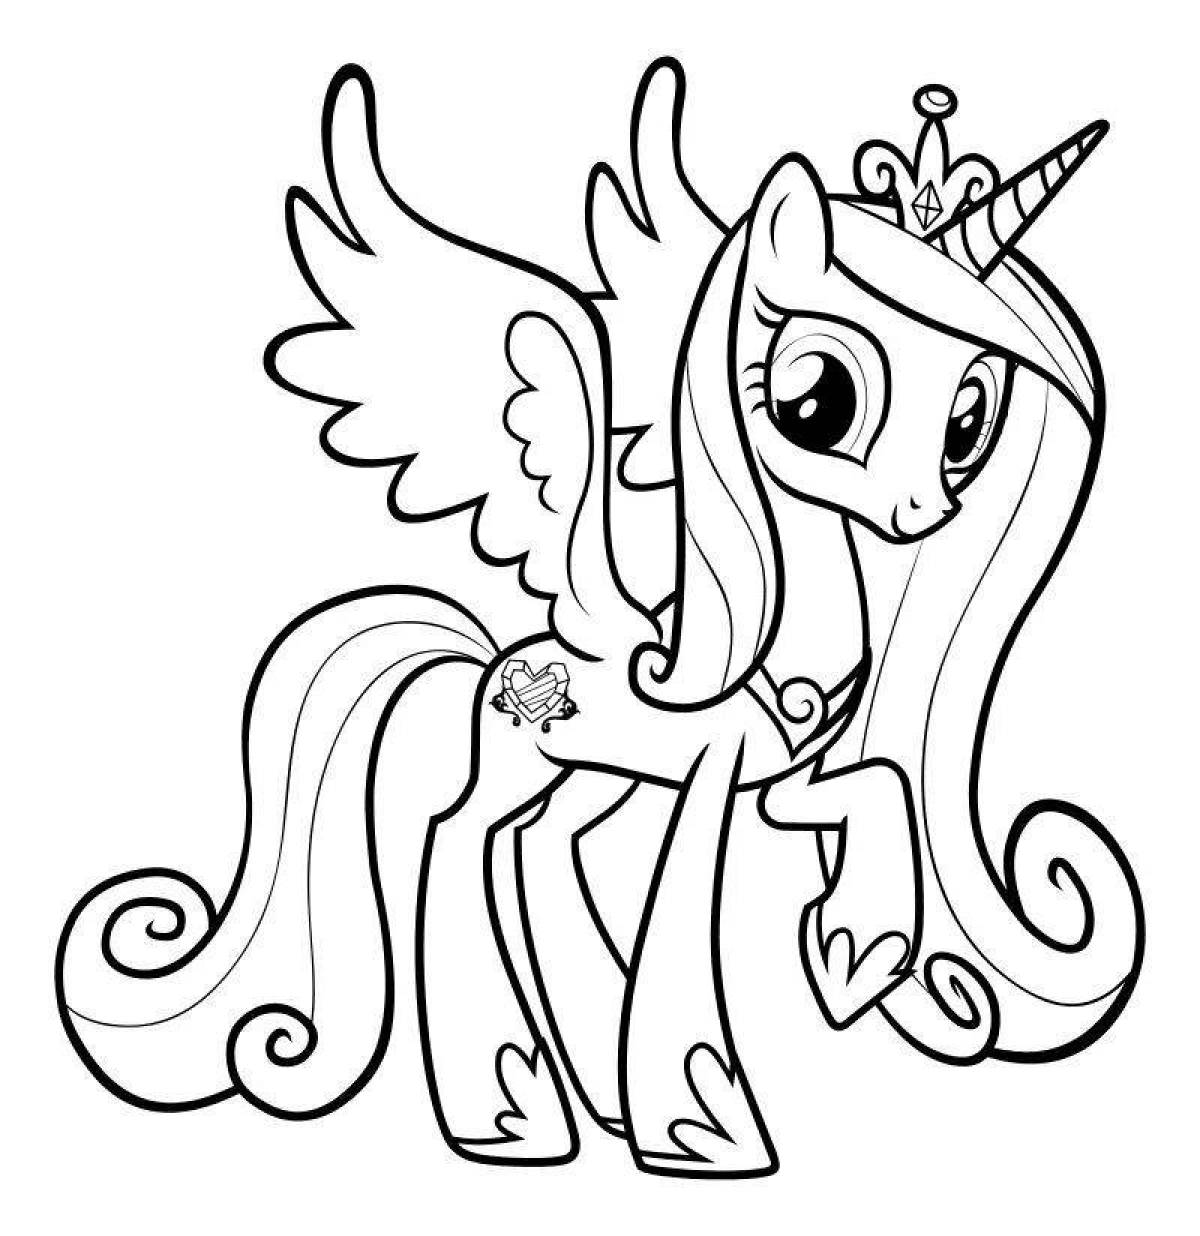 Bright little pony coloring book